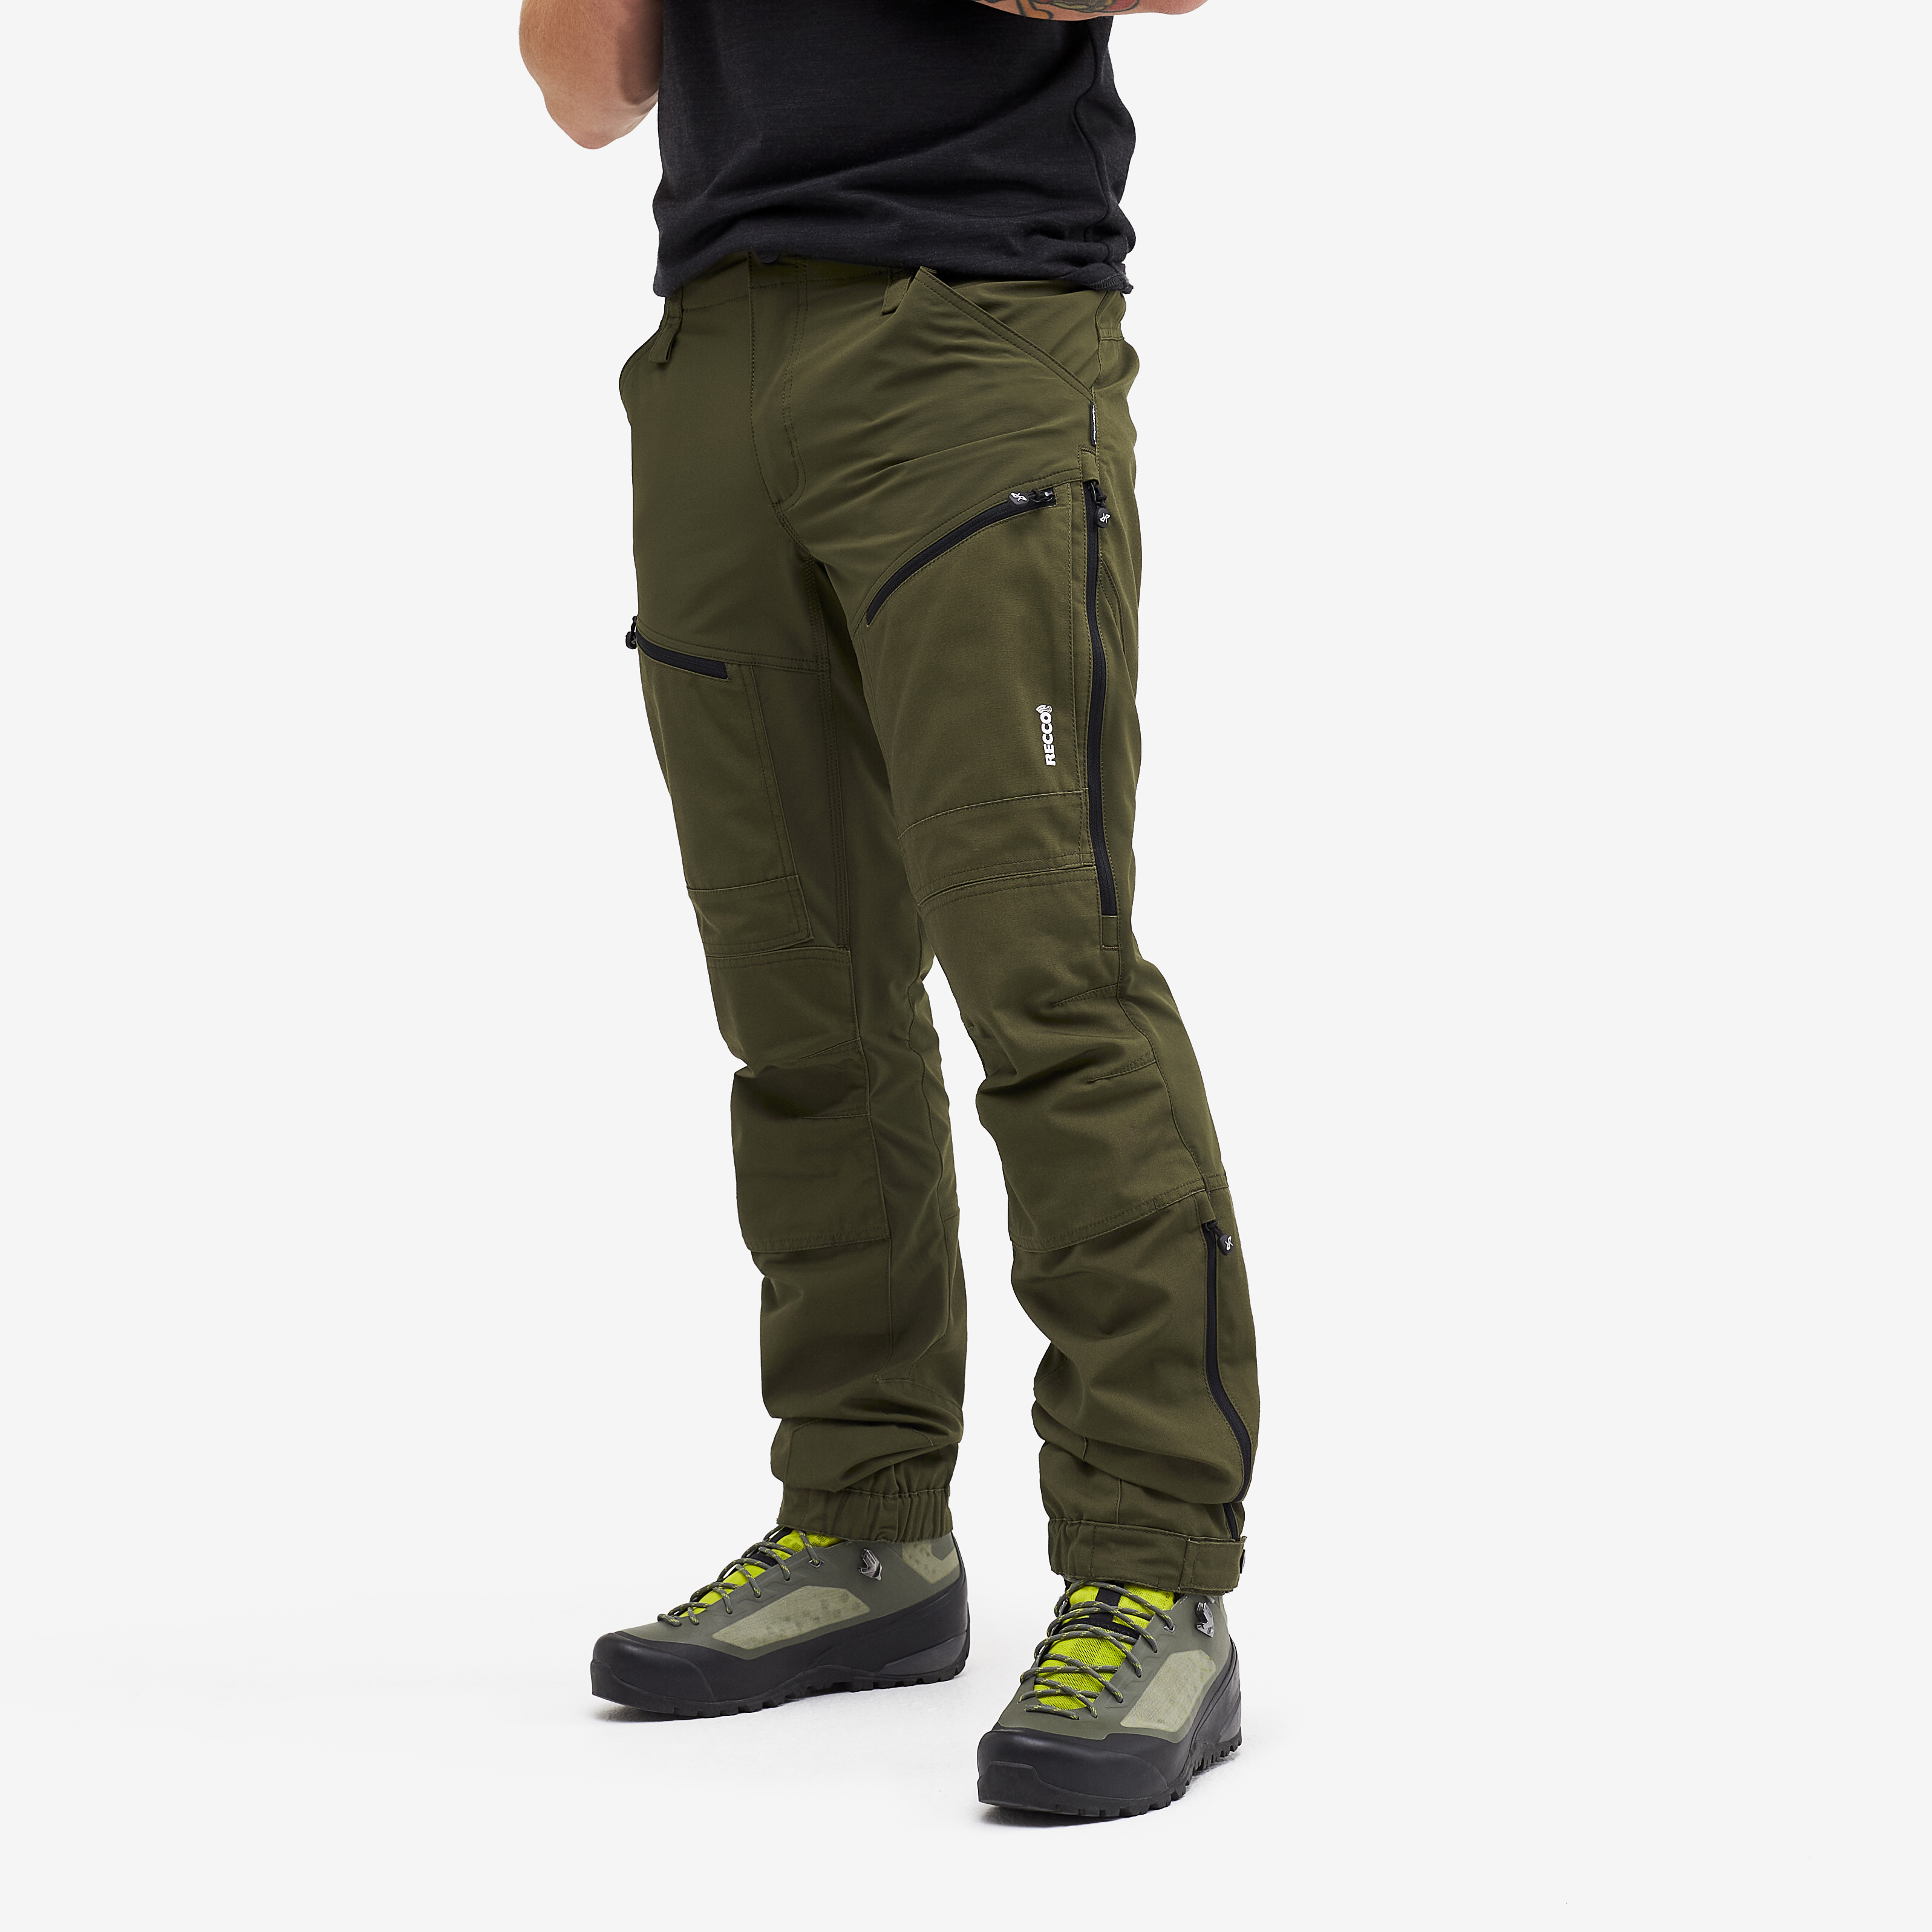 RVRC GP Pro Rescue hiking pants for men in green